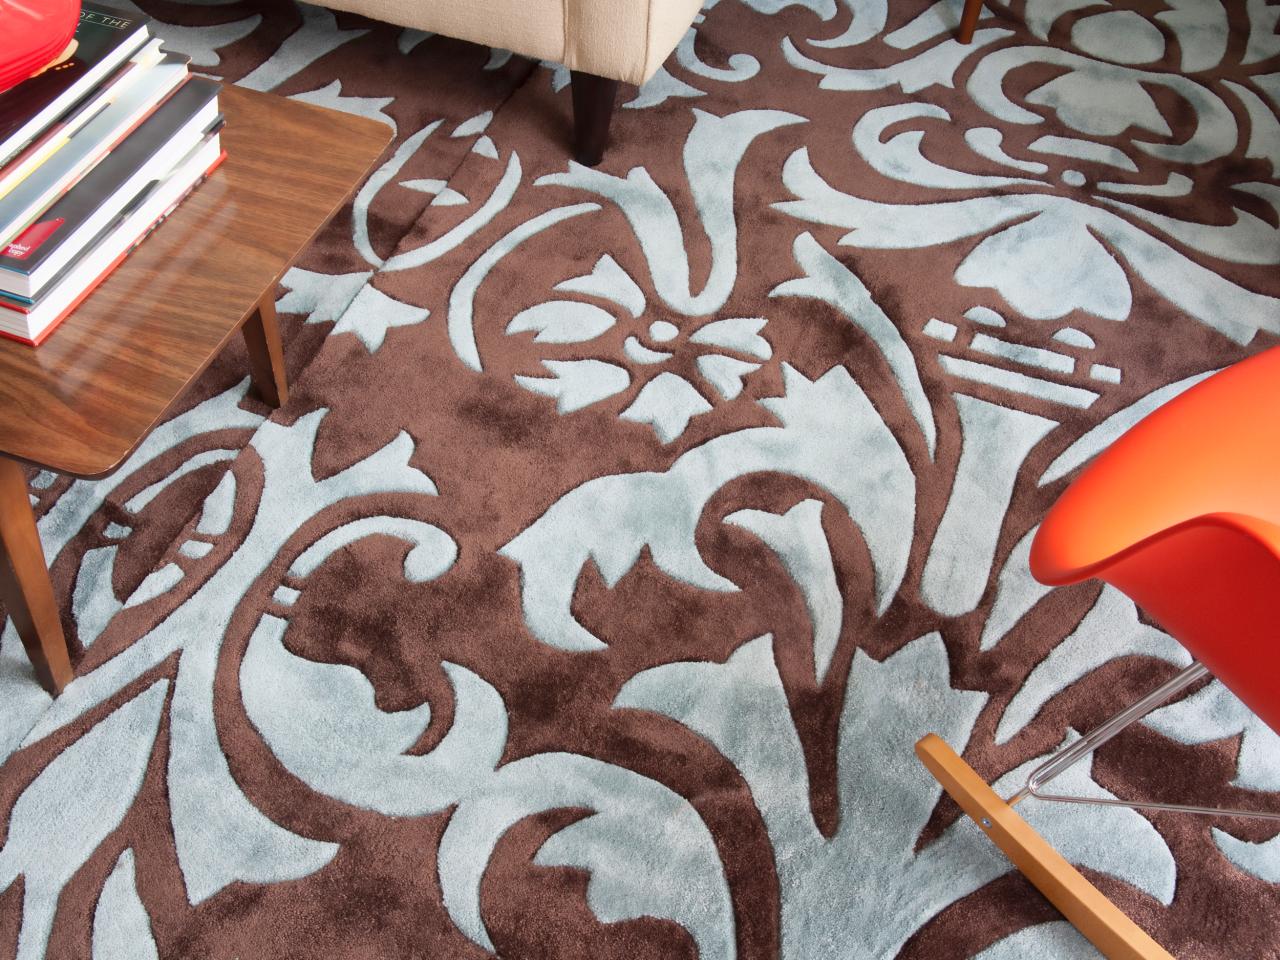 How To Make One Large Custom Area Rug, How To Make A Throw Rug From Carpet